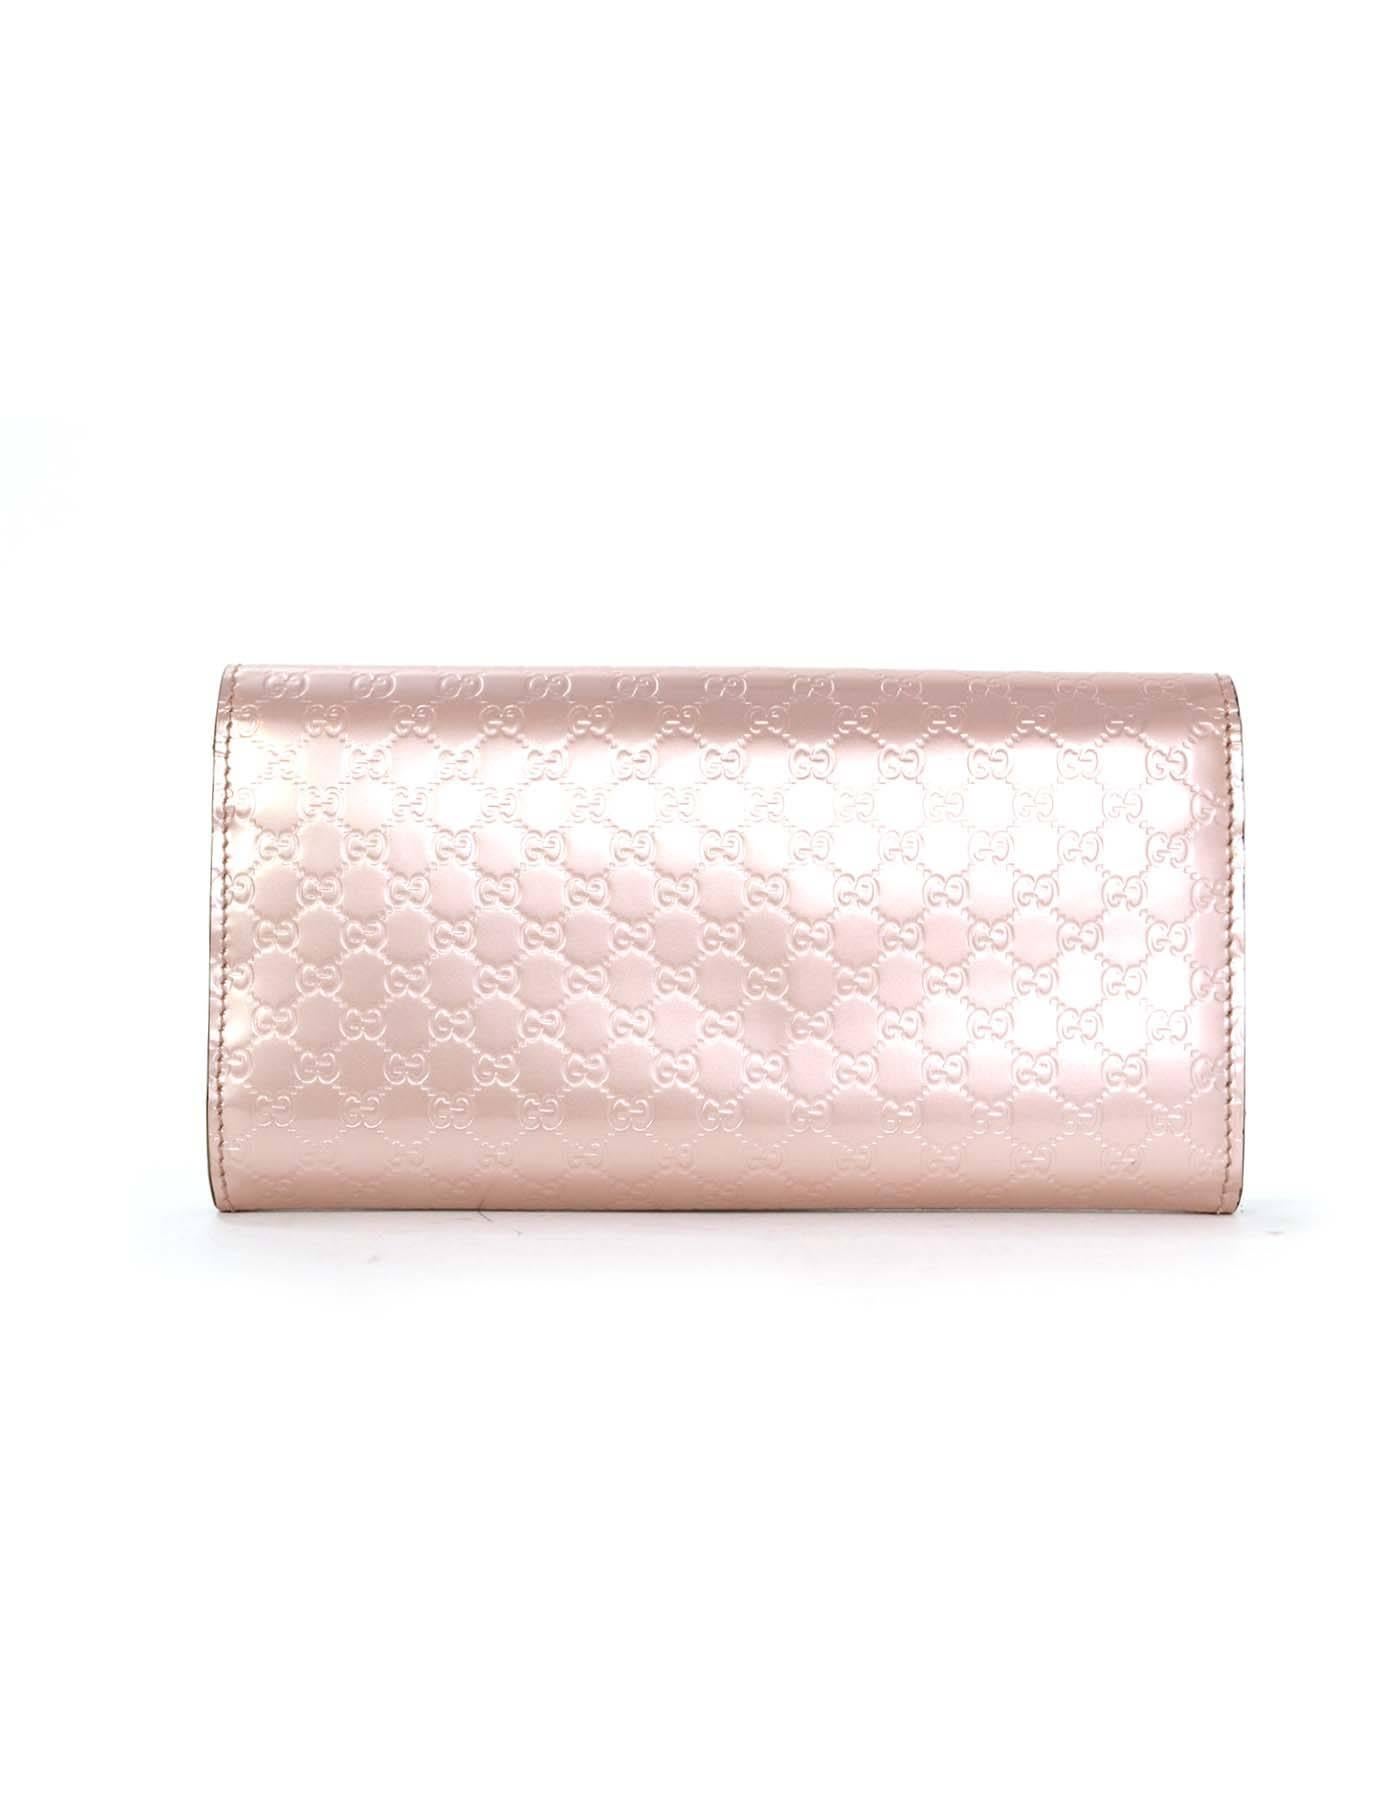 Beige Gucci Champagne Pink Patent Leather Monogram Wallet rt. $580